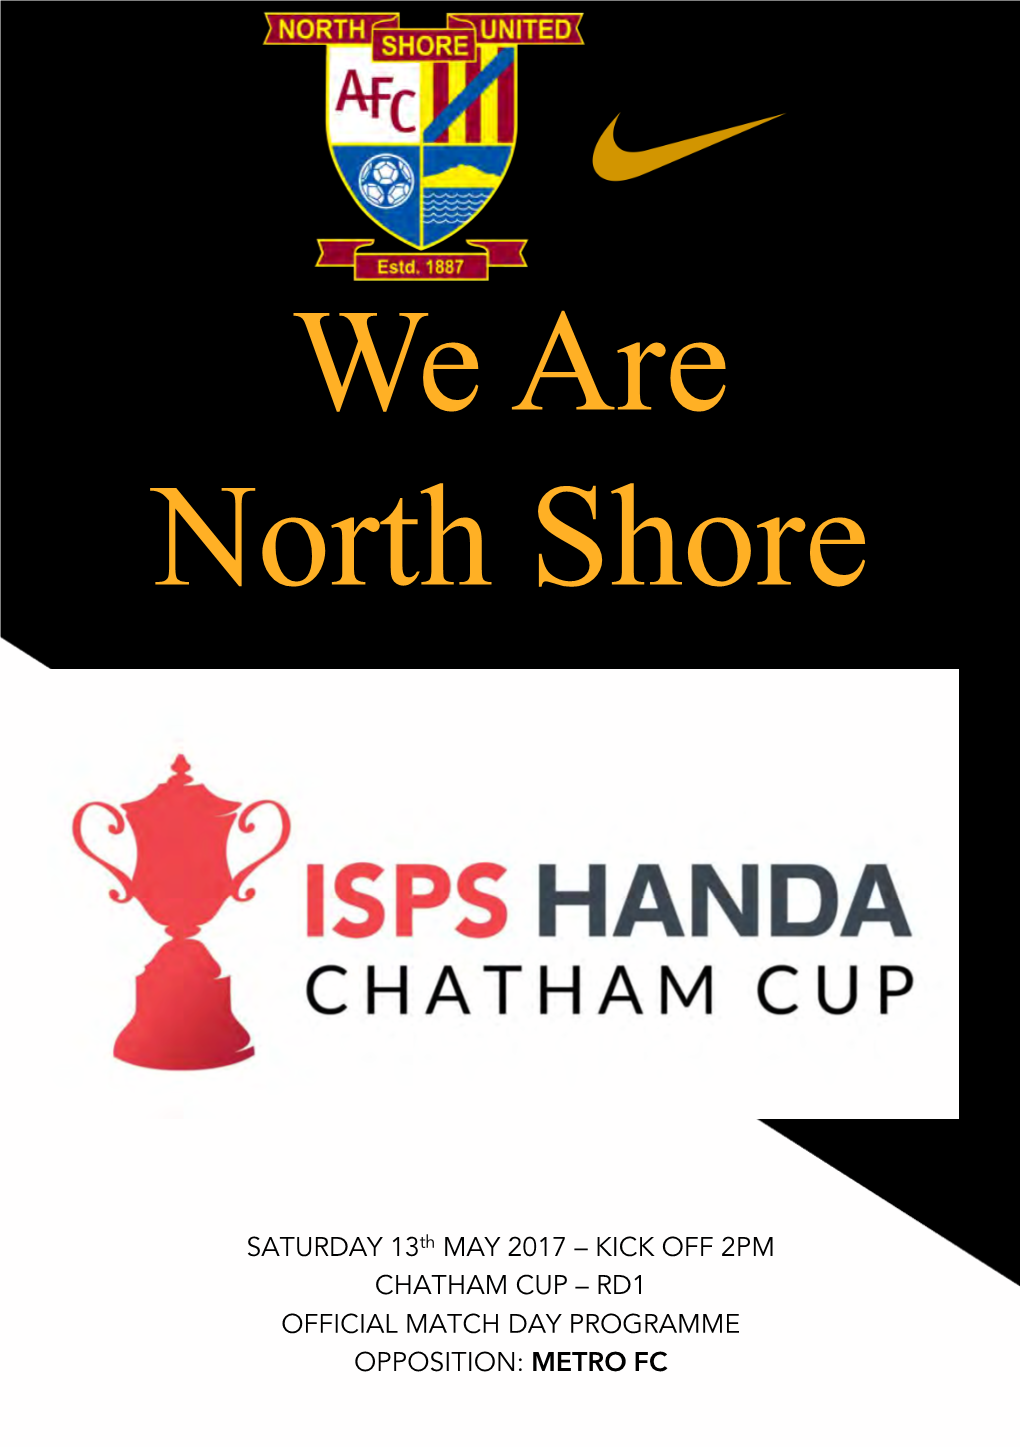 North Shore United Coachingmanager@Nsu .Org.Nz Has a Proud History of Doing Well in 021 0228 3770 the Chatham Cup